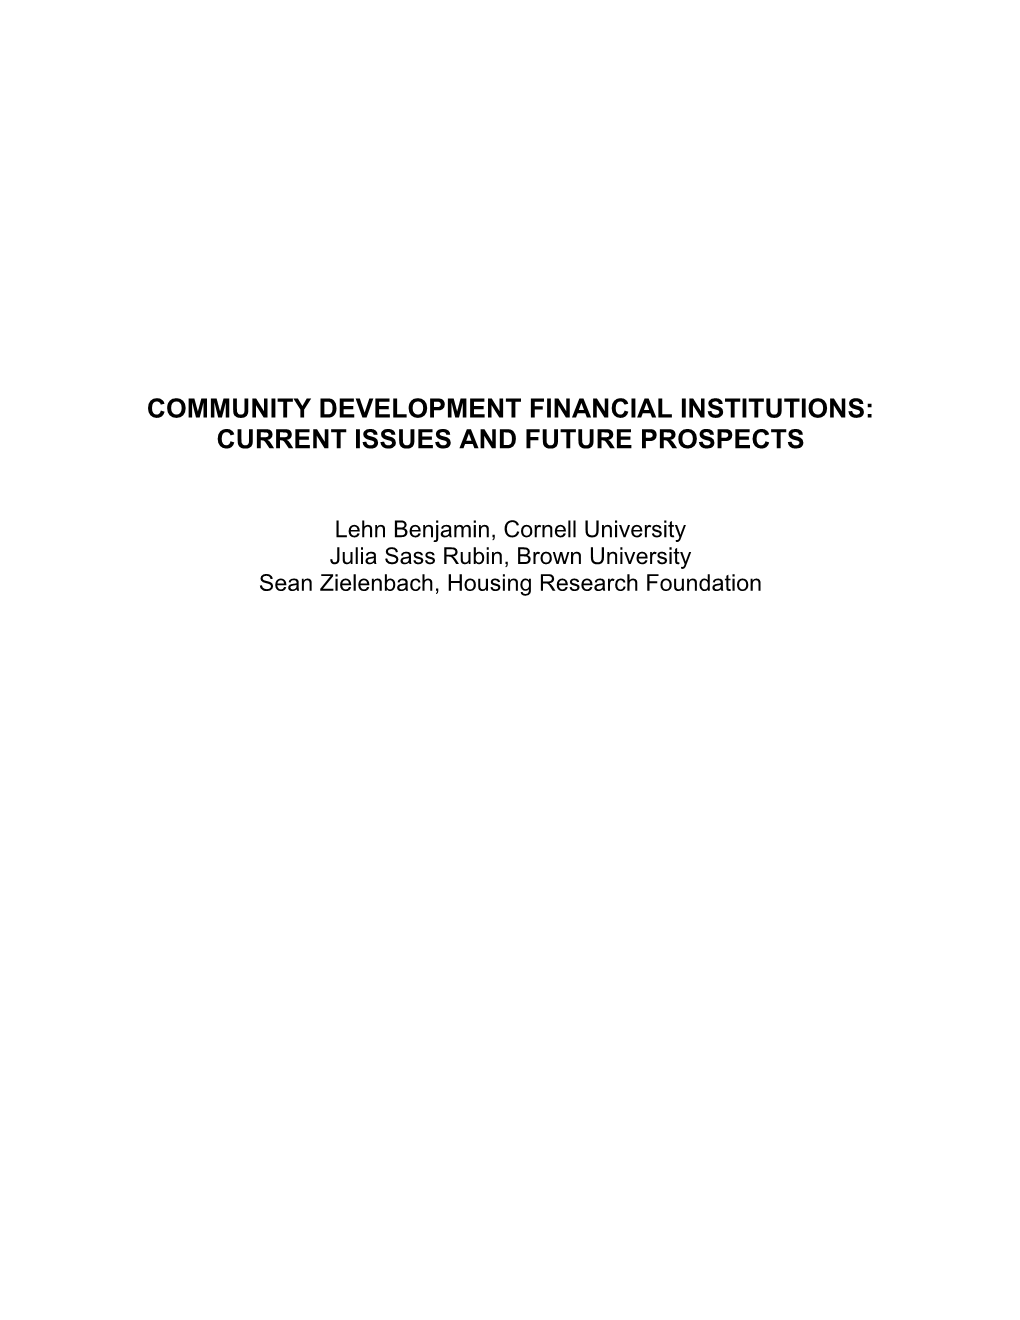 Community Development Financial Institutions: Current Issues and Future Prospects